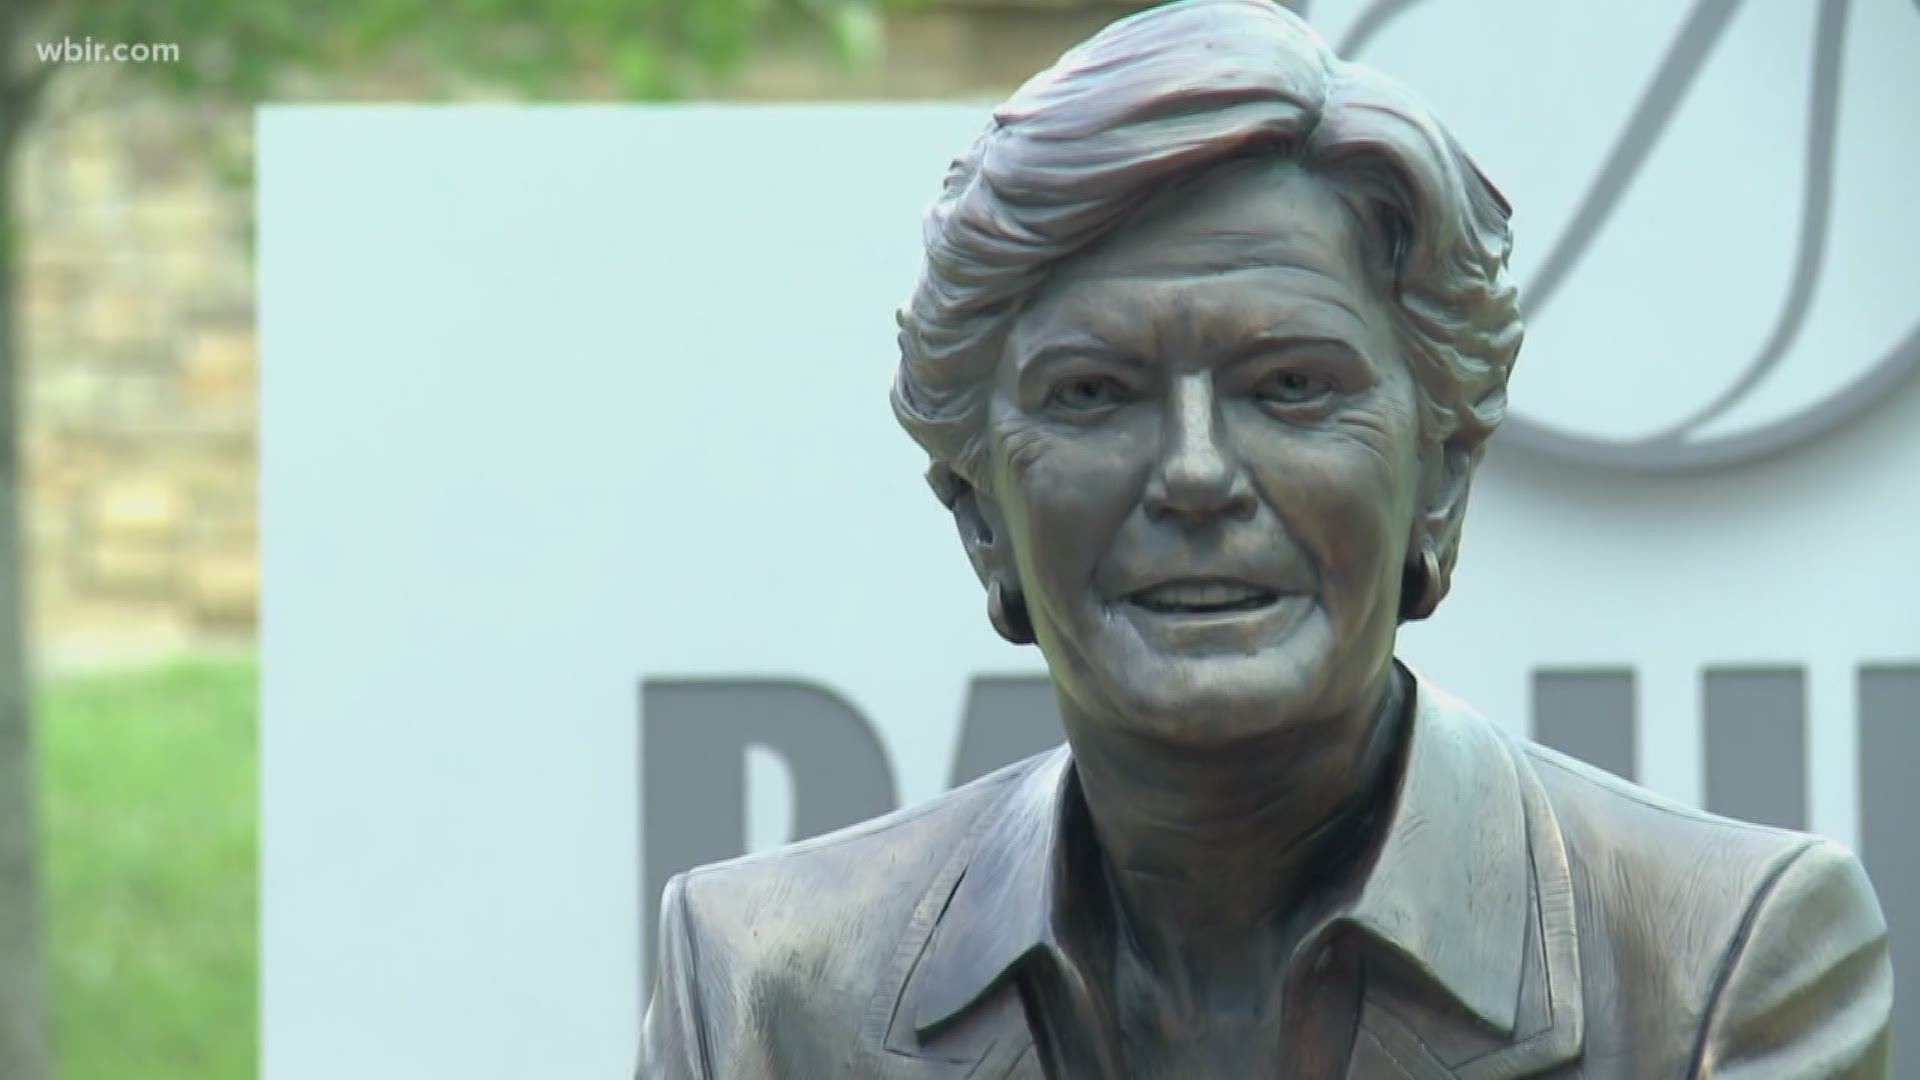 The legendary Lady Vol coach grew up on a farm in Clarksville, and her hometown wanted to honor her.